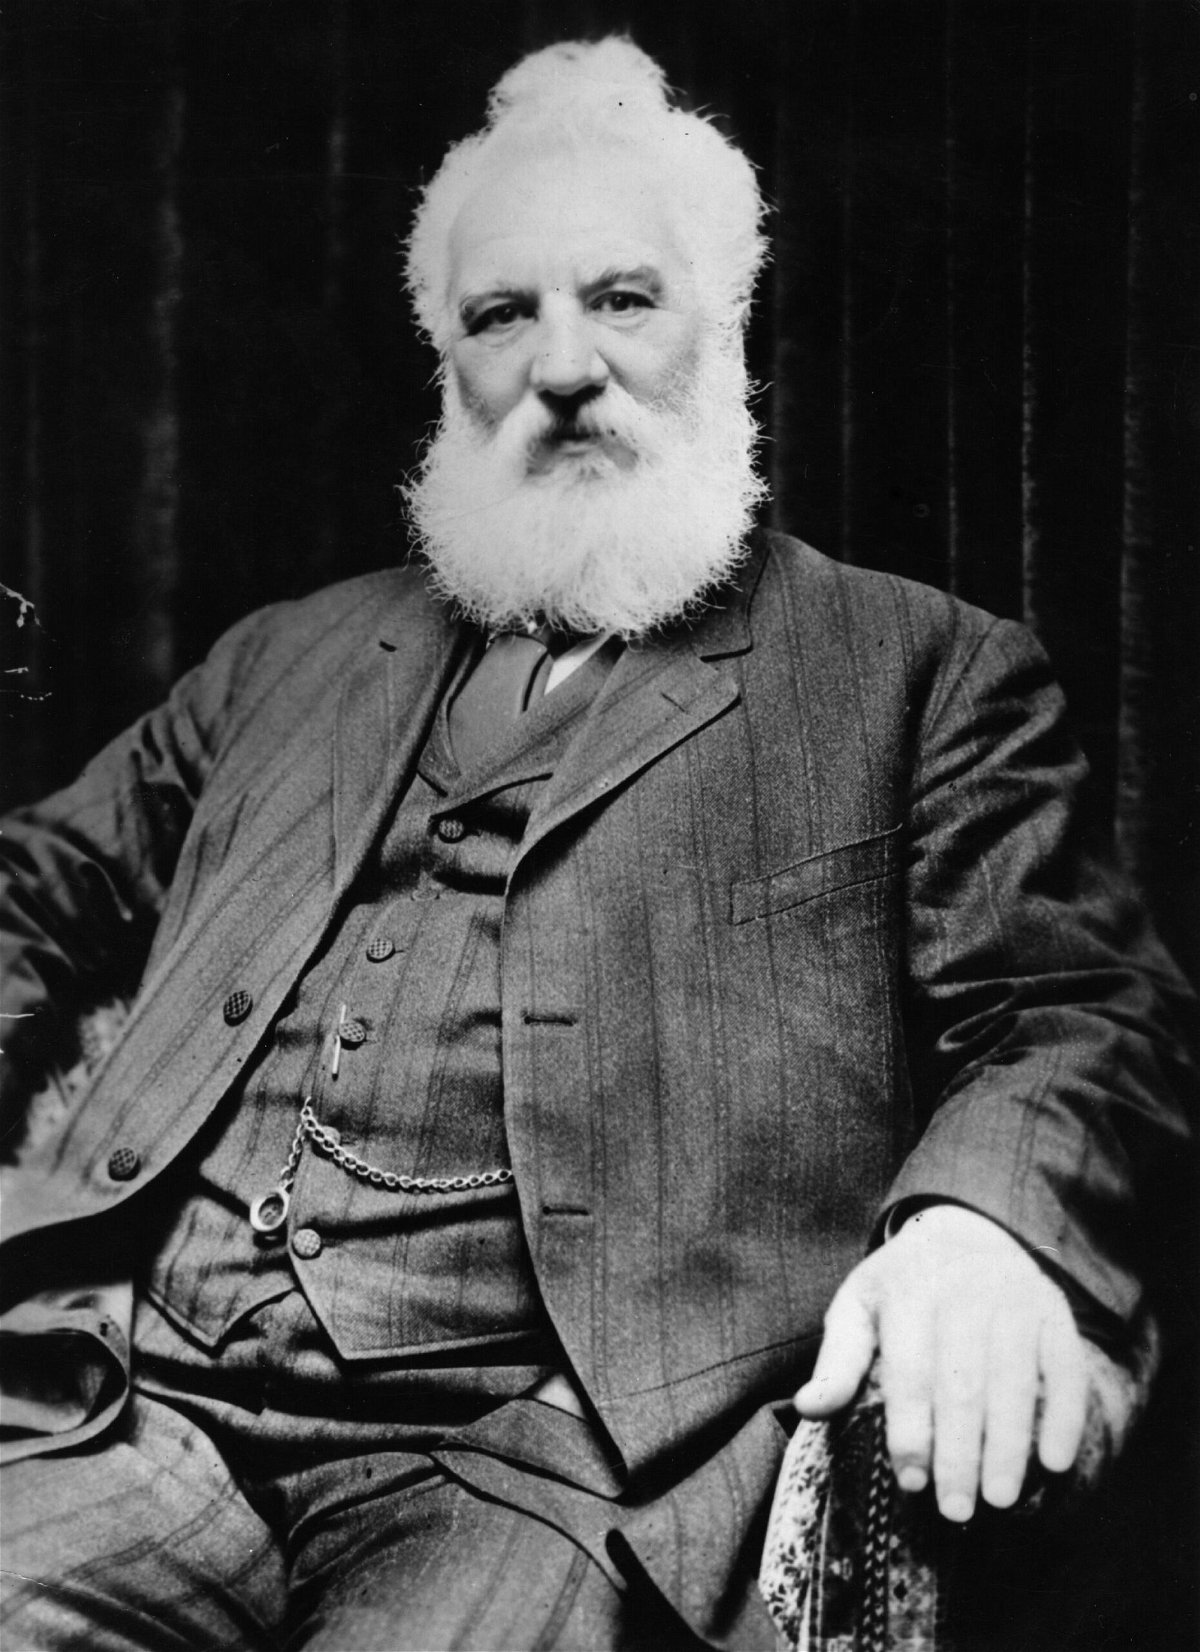 <i>Topical Press Agency/Hulton Archive/Getty Images</i><br/>Pictured here in an undated photo is Scottish inventor Alexander Graham Bell (1847-1922)